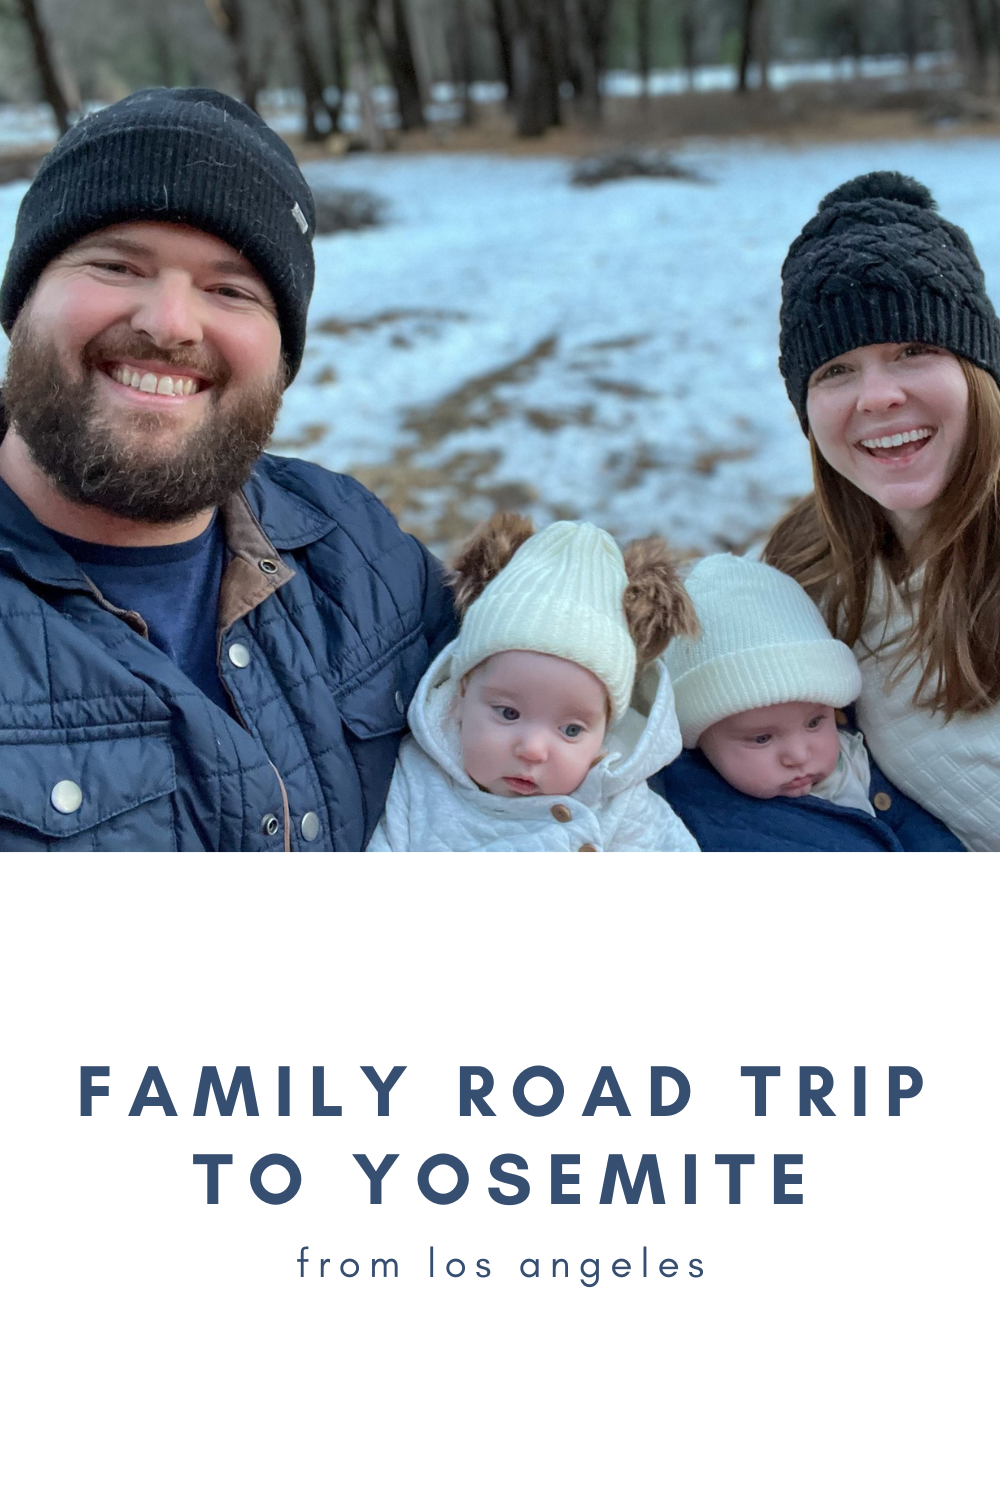 family road trip to yosemite national park, visit california, road trip from los angeles, la roadtrip, bass lake, cabin, what to do near in yosemite, lments of style, firefall, february, yosemite in off season